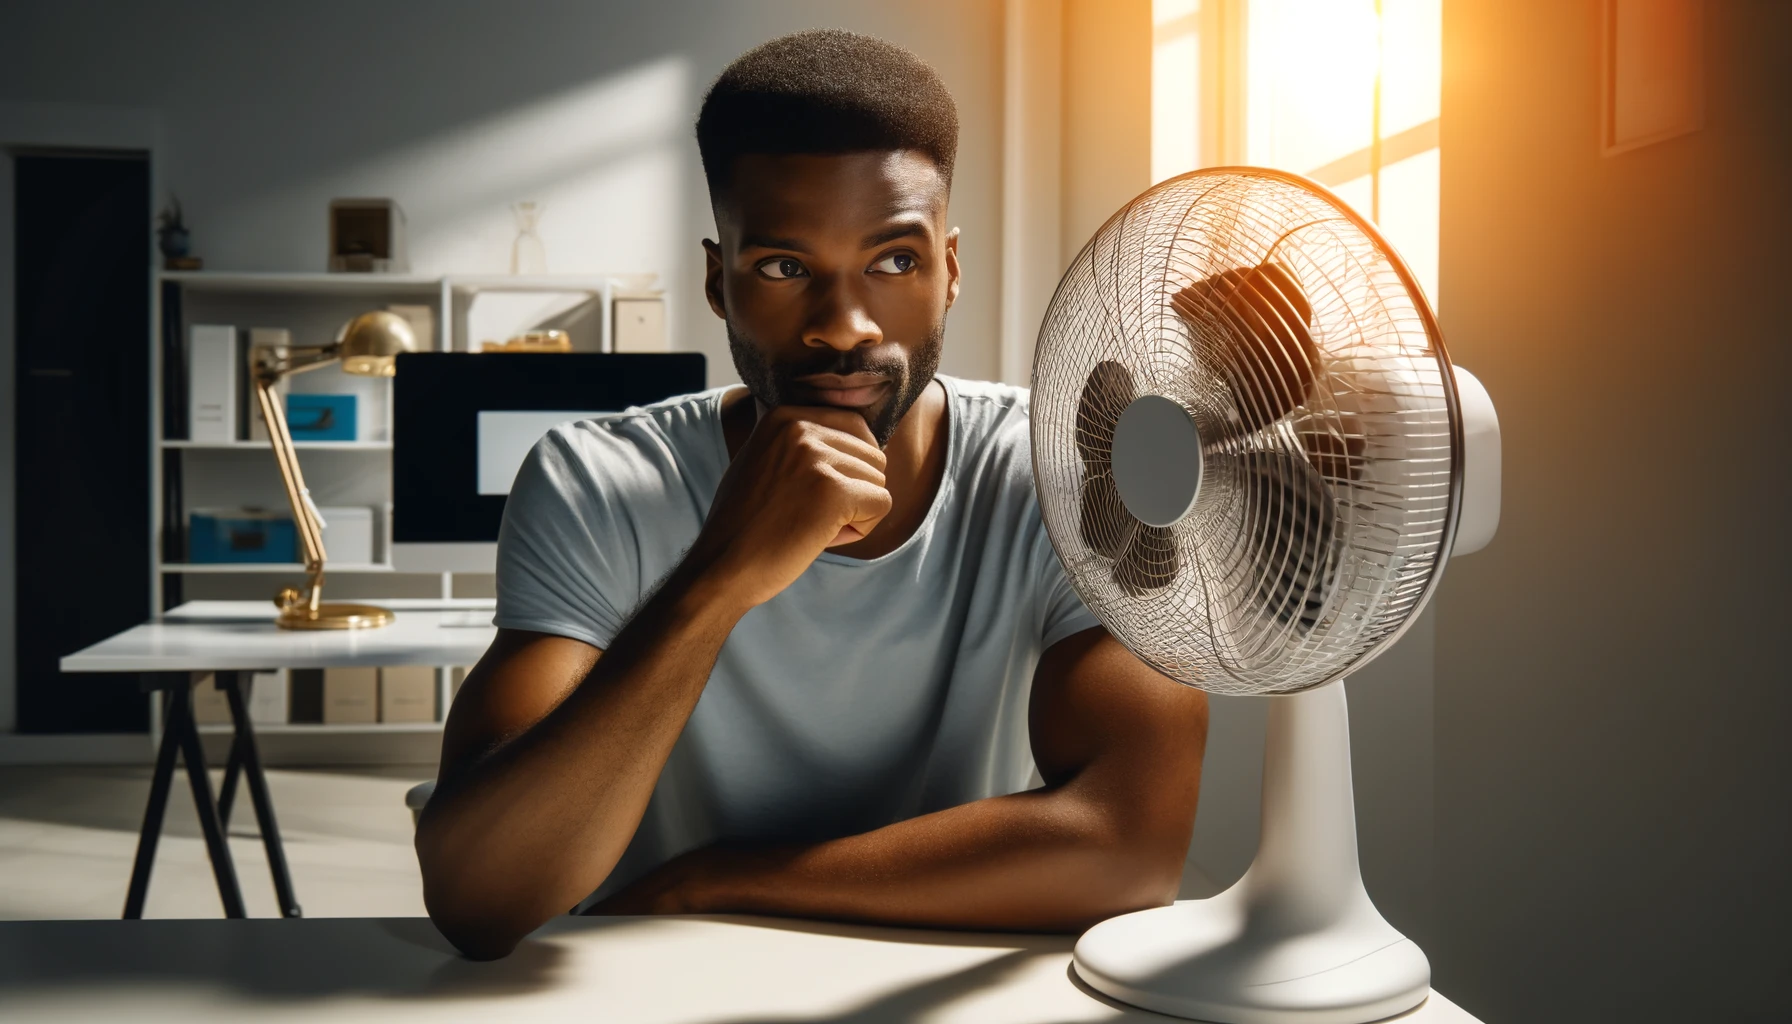 AC Not Working? Here Are 4 Common Issues & Solutions